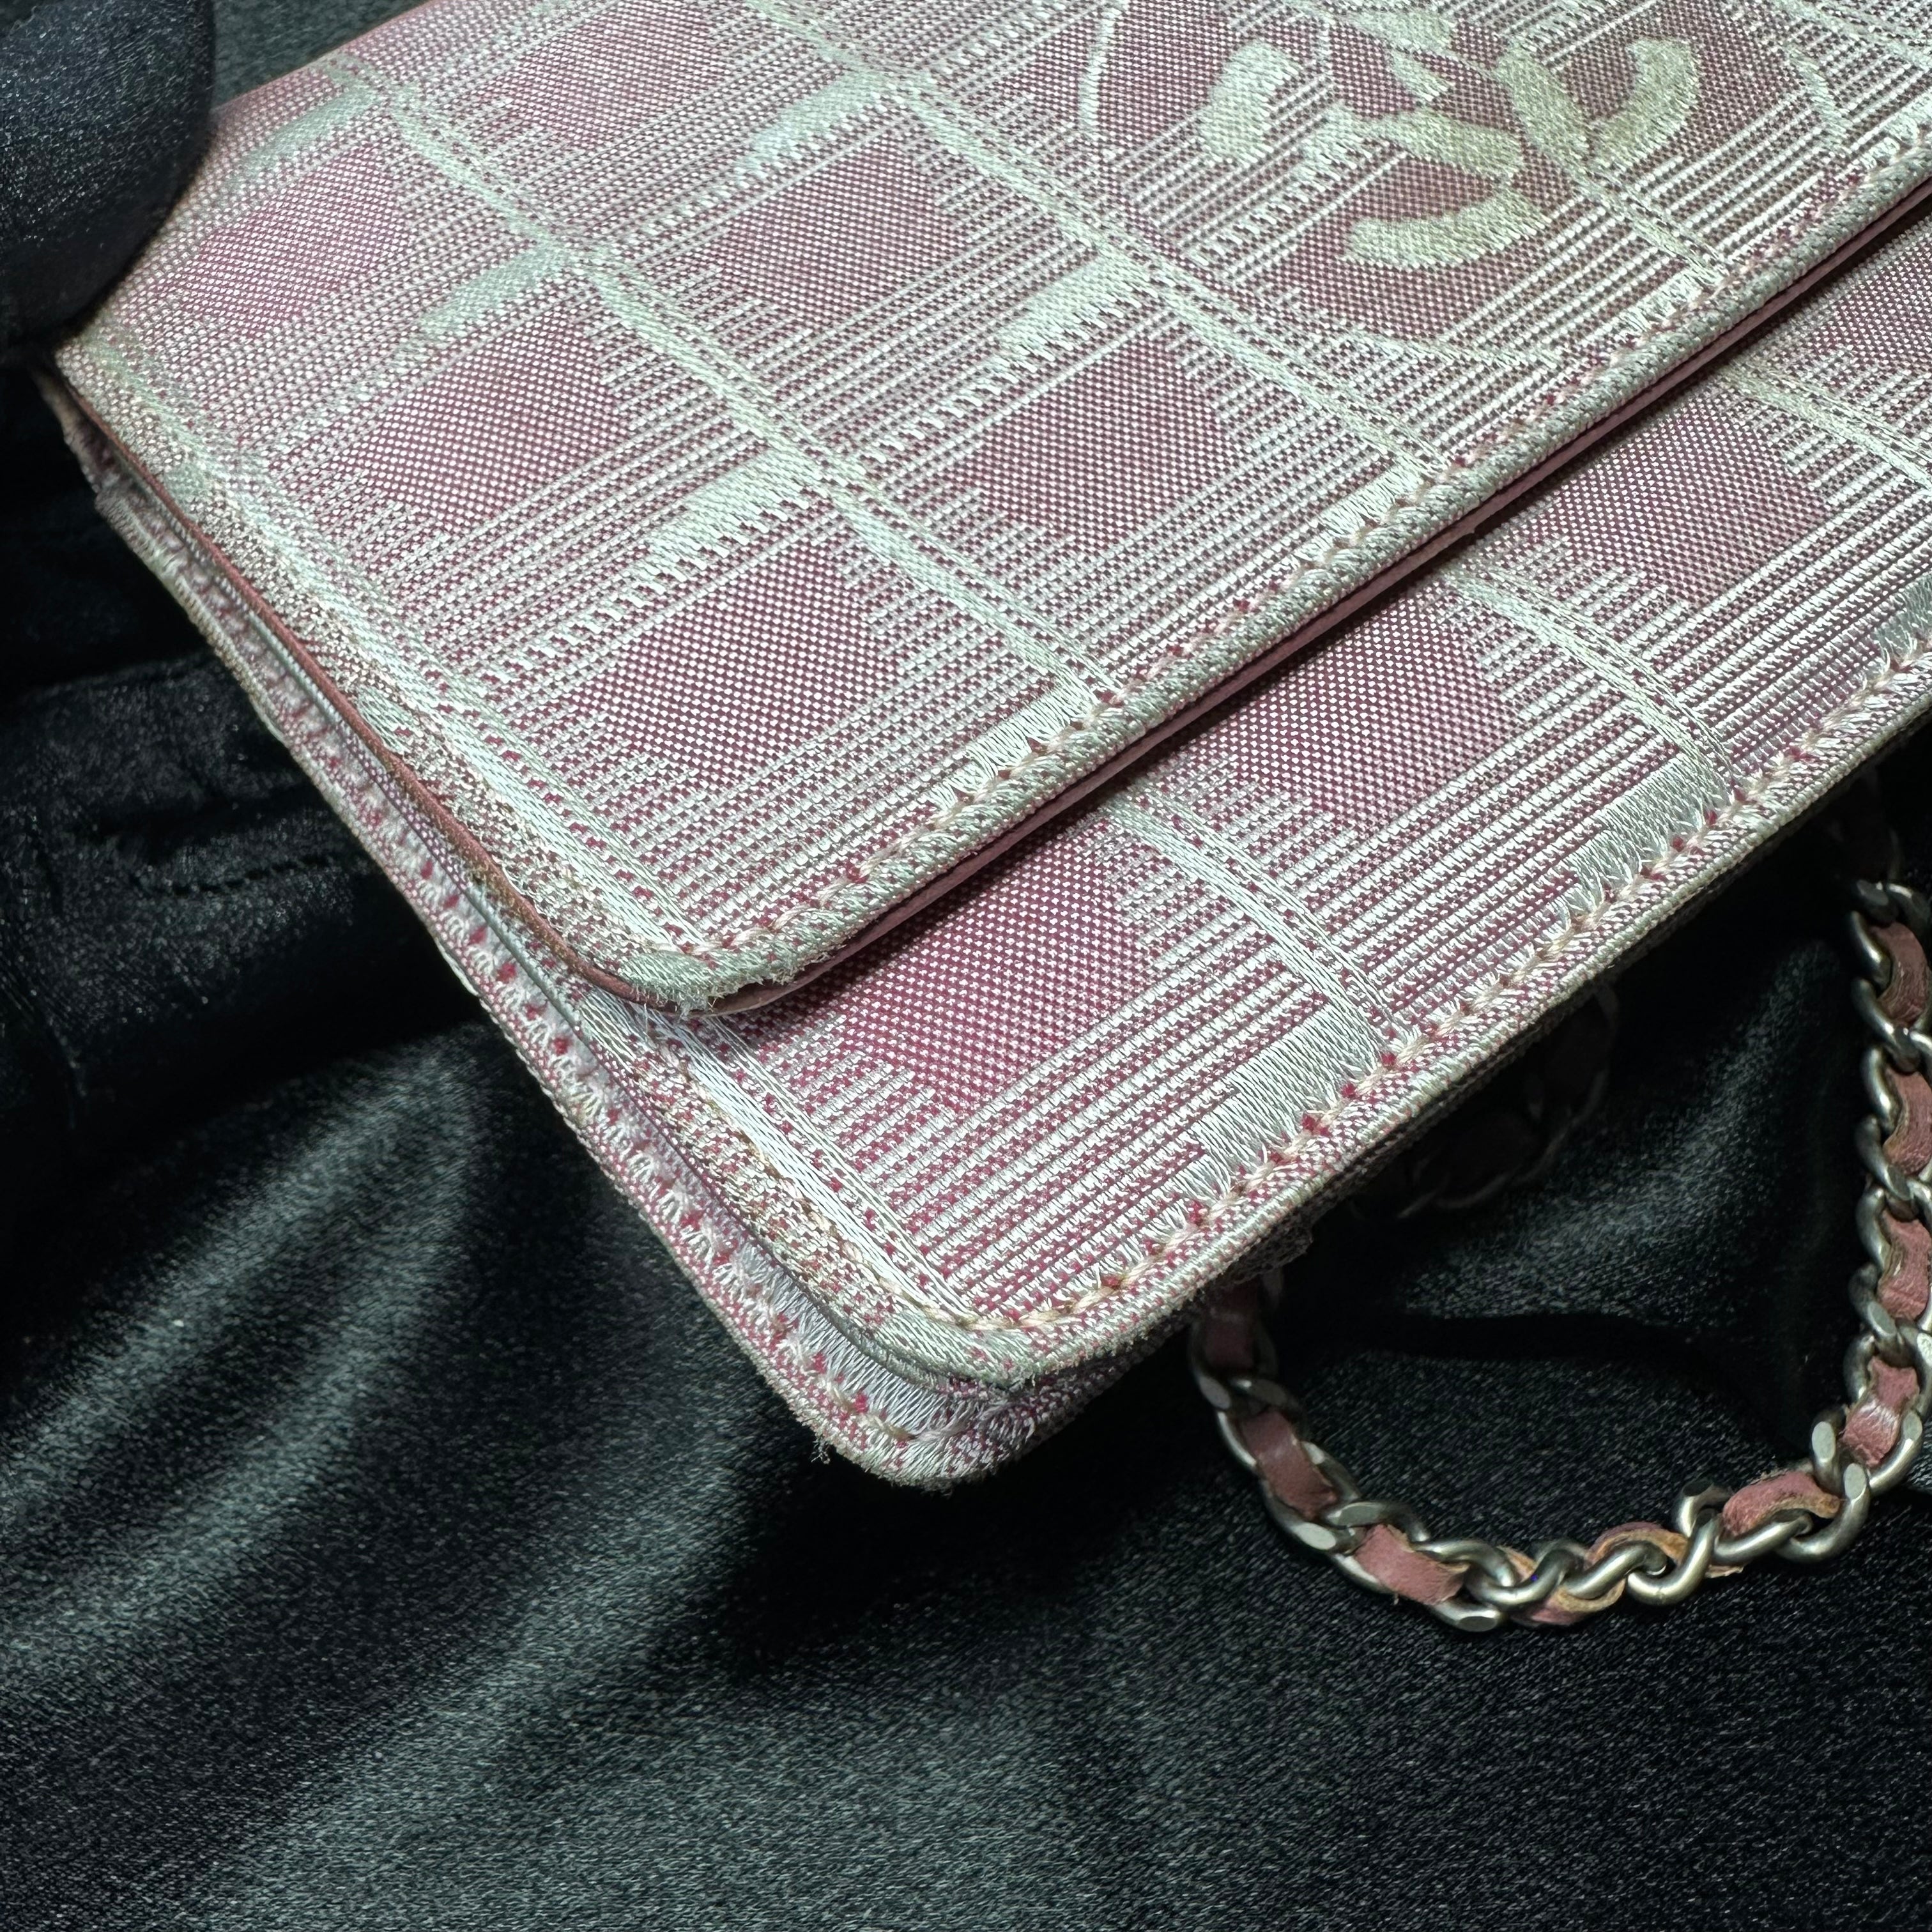 Chanel Pink Travel Line Wallet on Chain